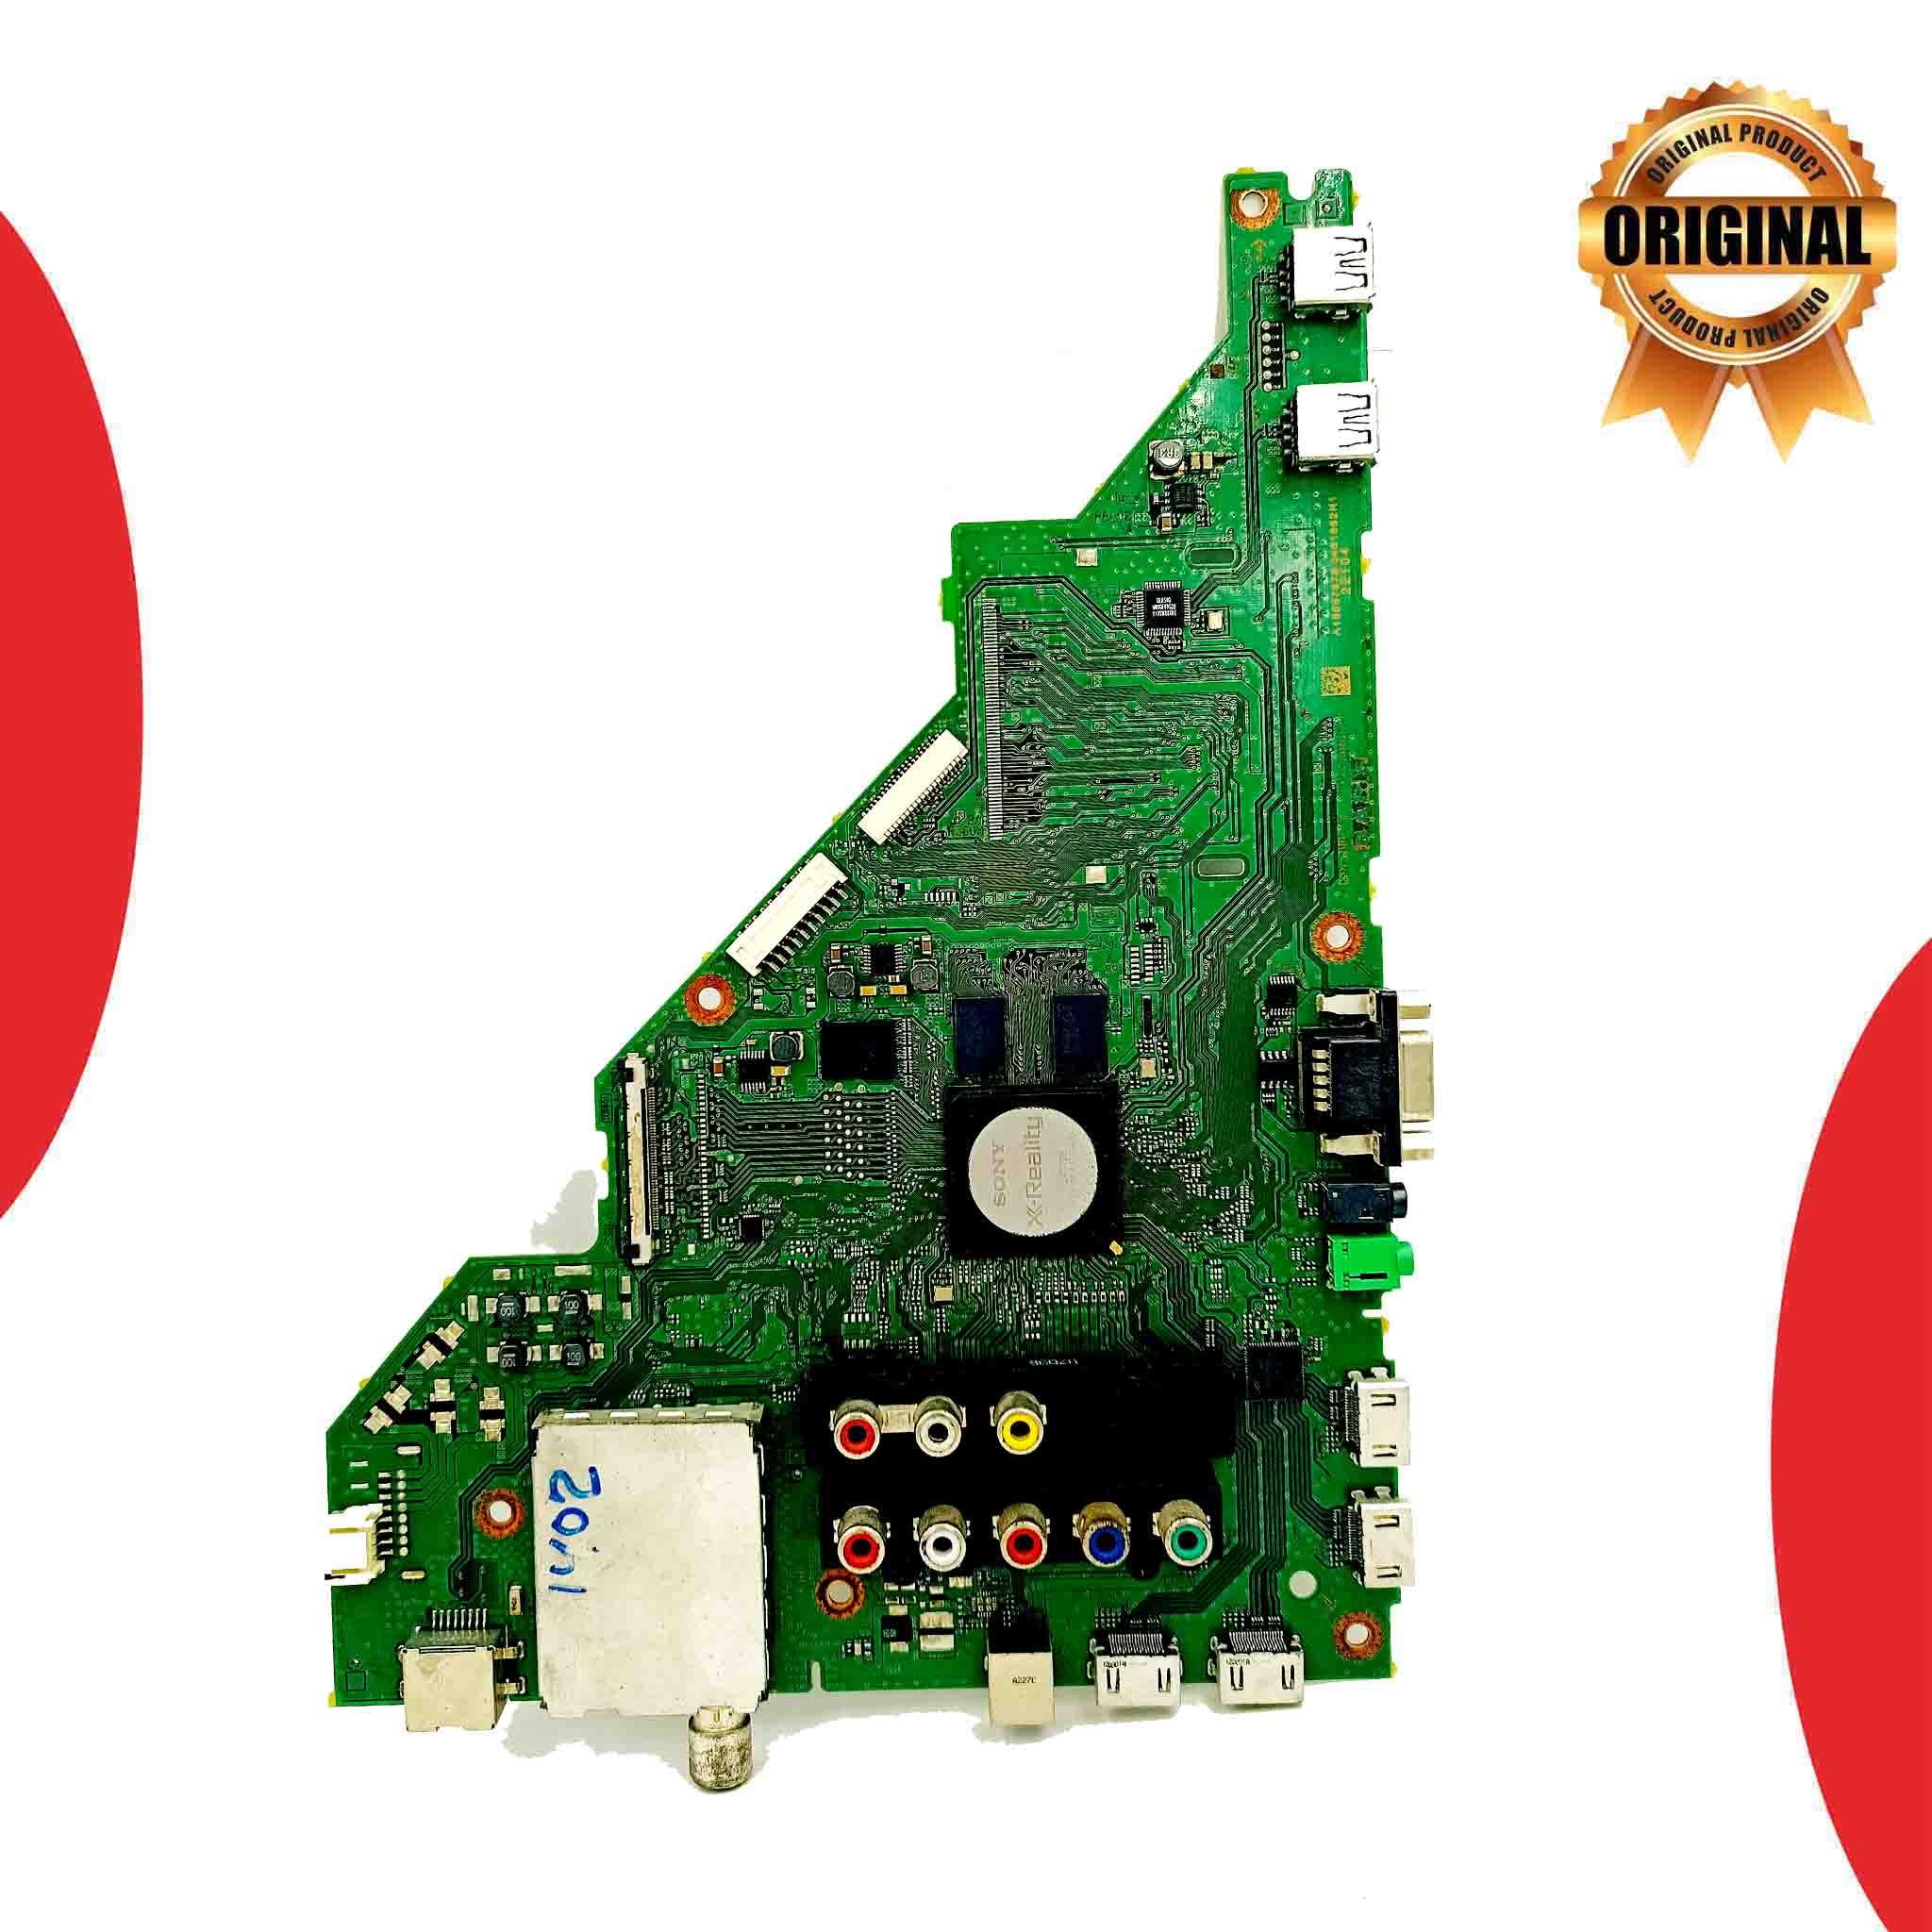 Model 40HX750 Sony LED TV Motherboard at Attractive Price